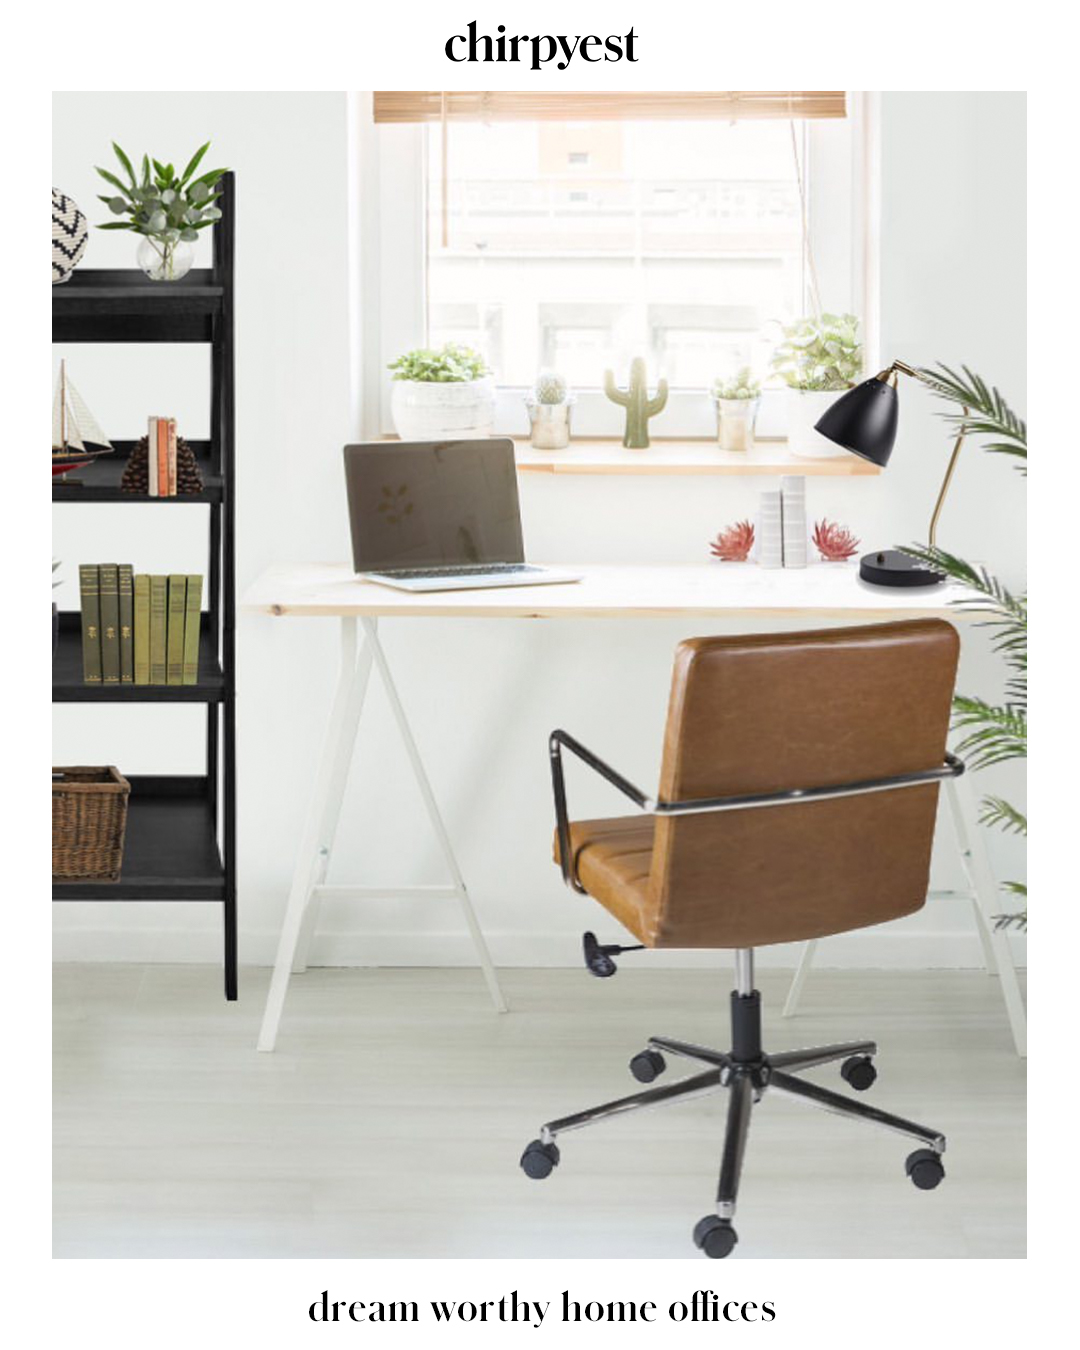 Dream Worthy Home offices White Walls and Plants